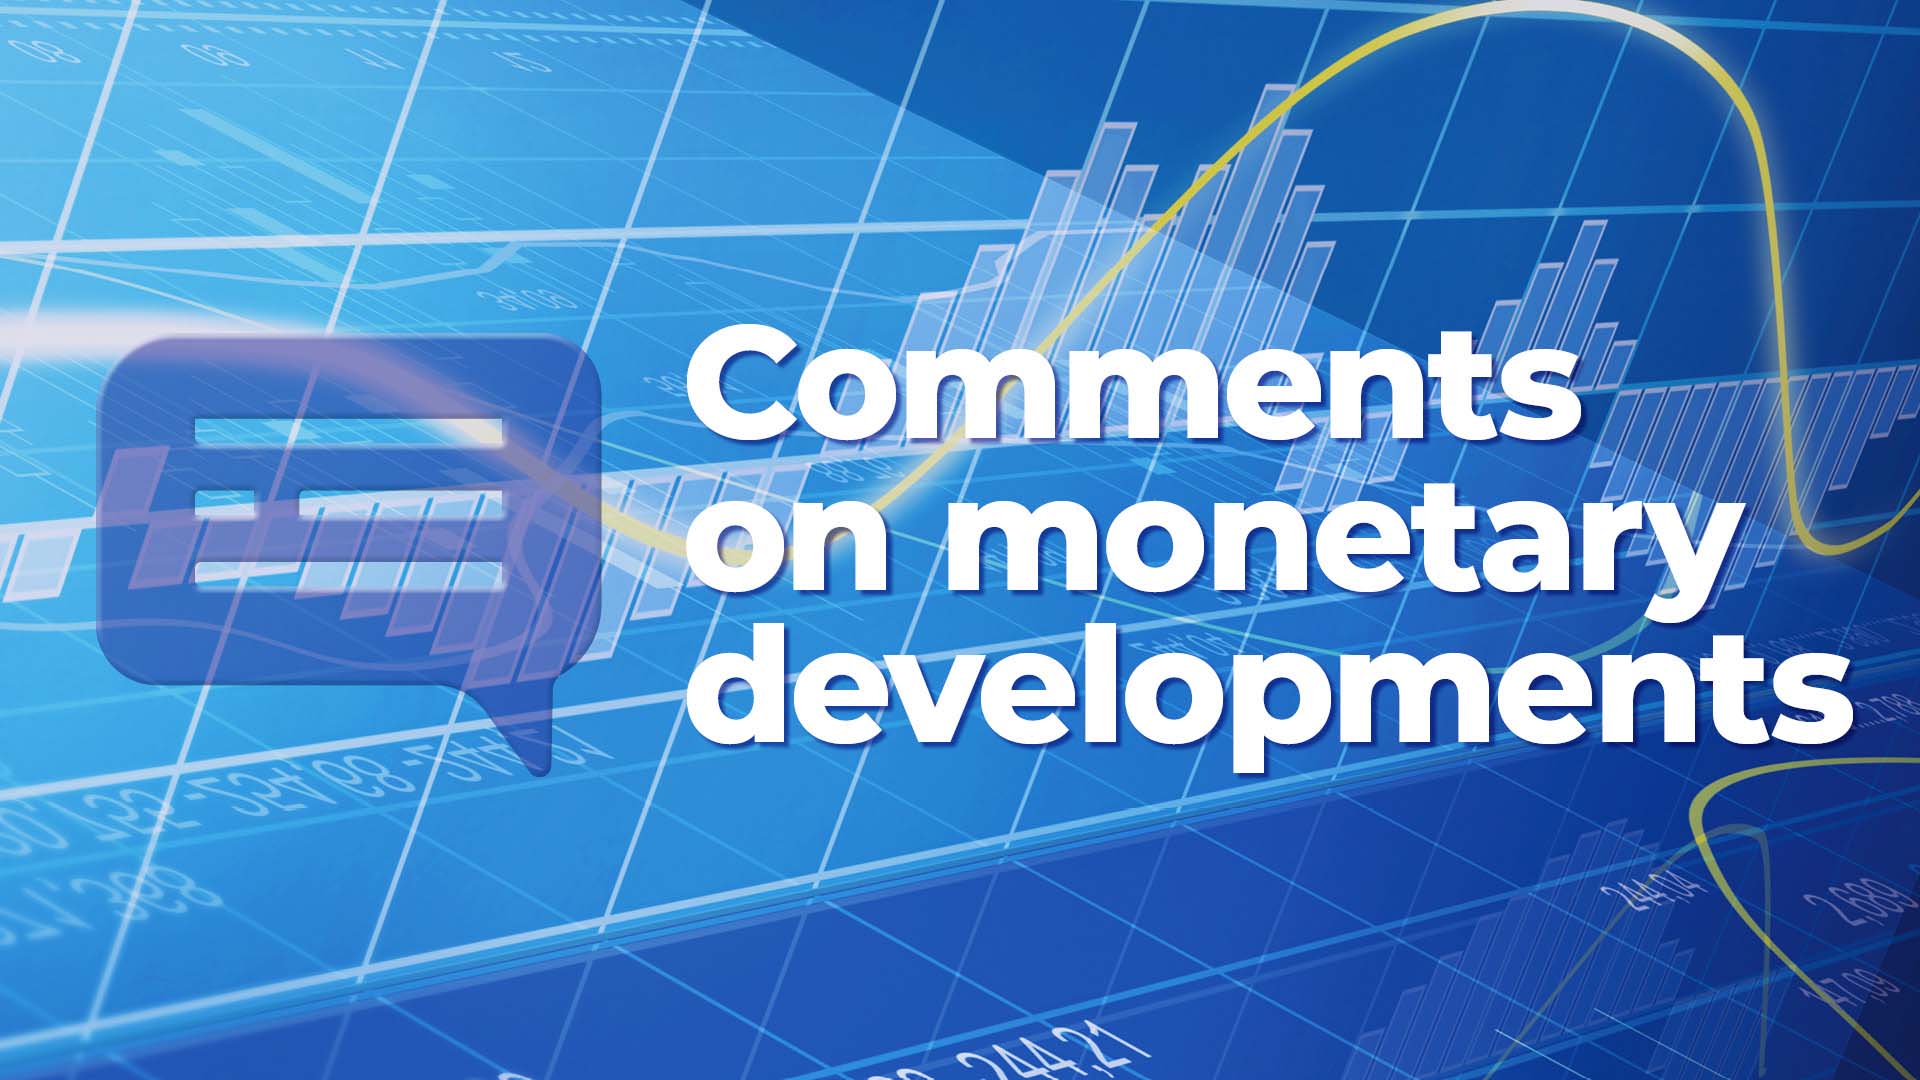 Comments on monetary developments for May 2022